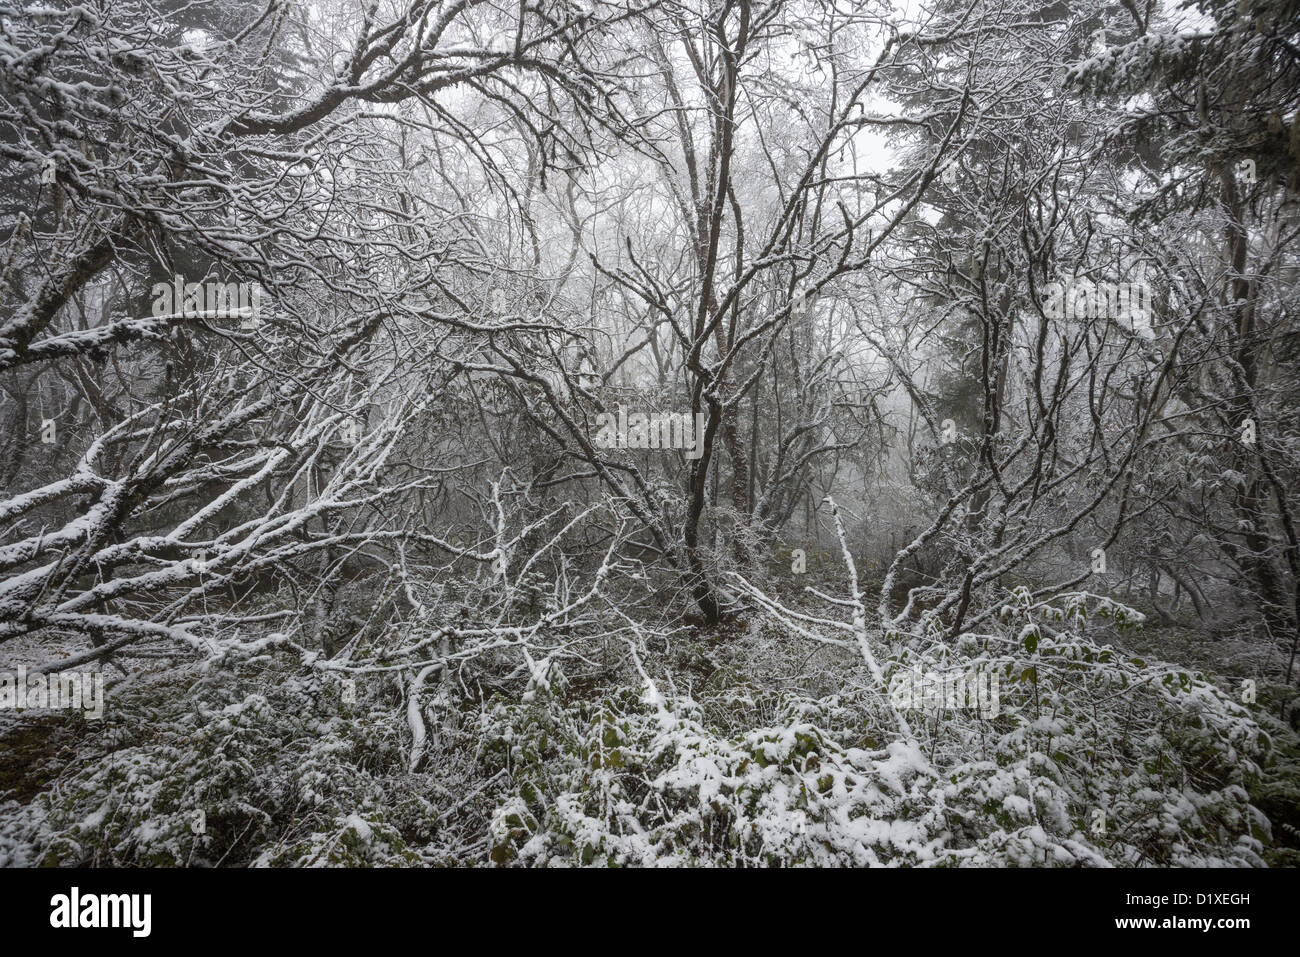 The picture of a winter forest in Huanglong National Park (China) Stock Photo